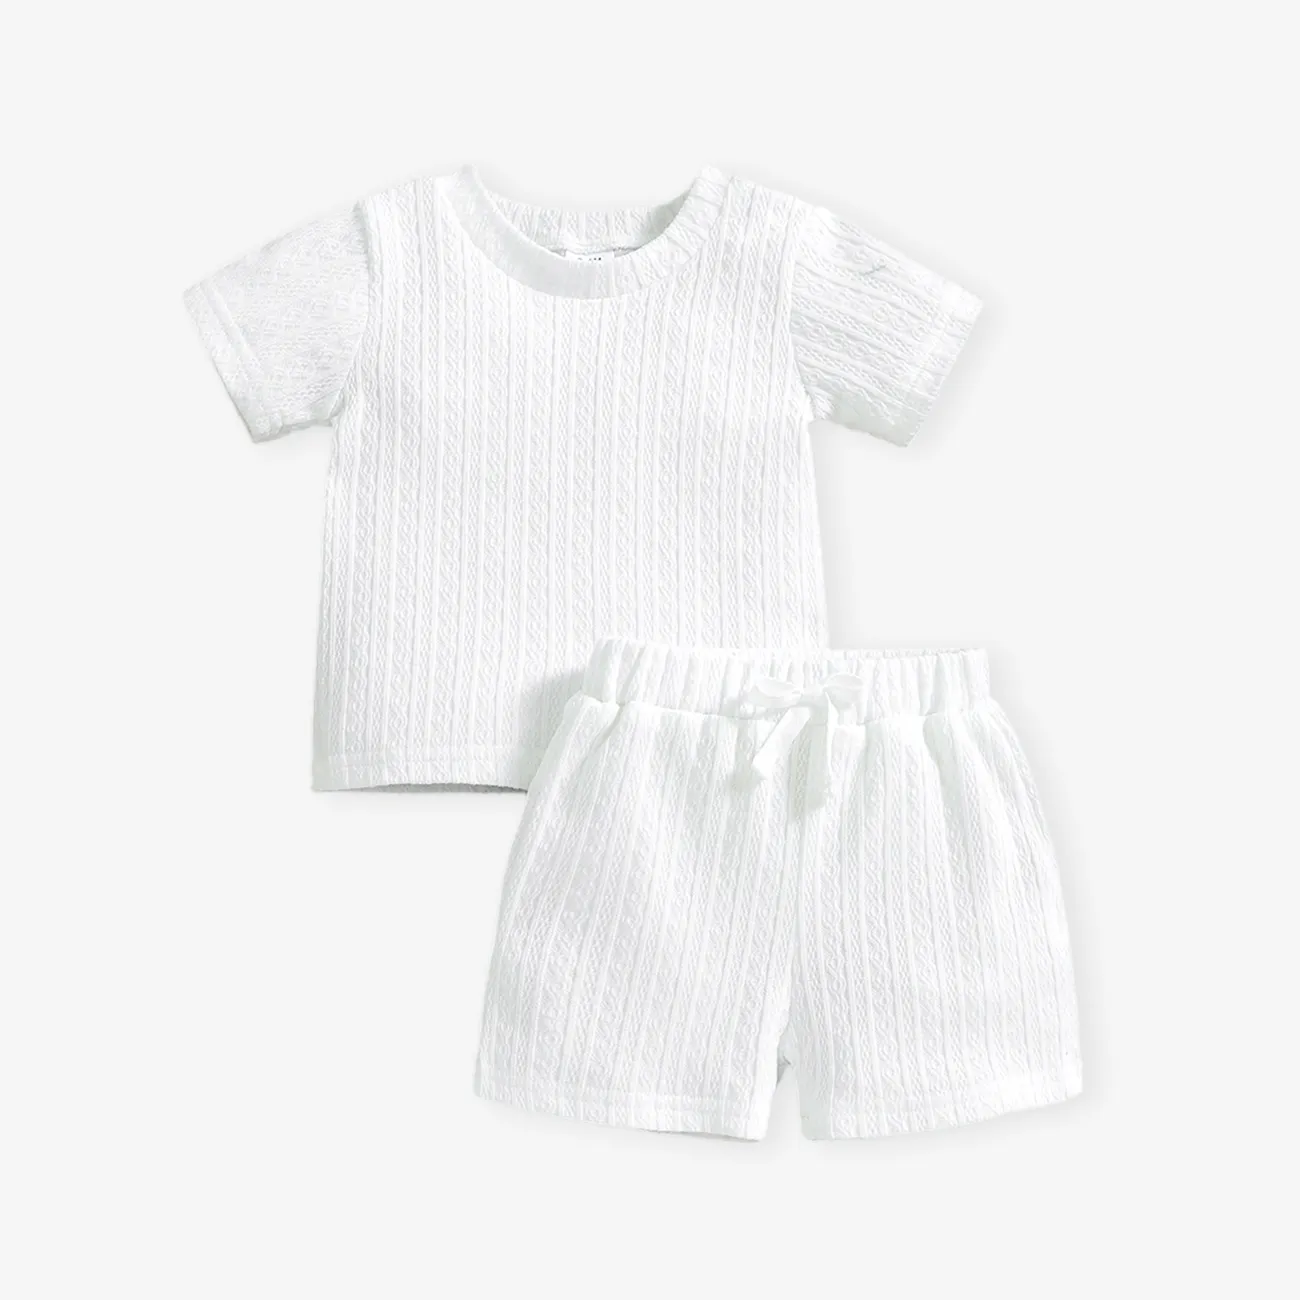 2pcs Baby Boy/Girl 95% Cotton Short-sleeve Solid Cable Knit Tee and Shorts Set White big image 1